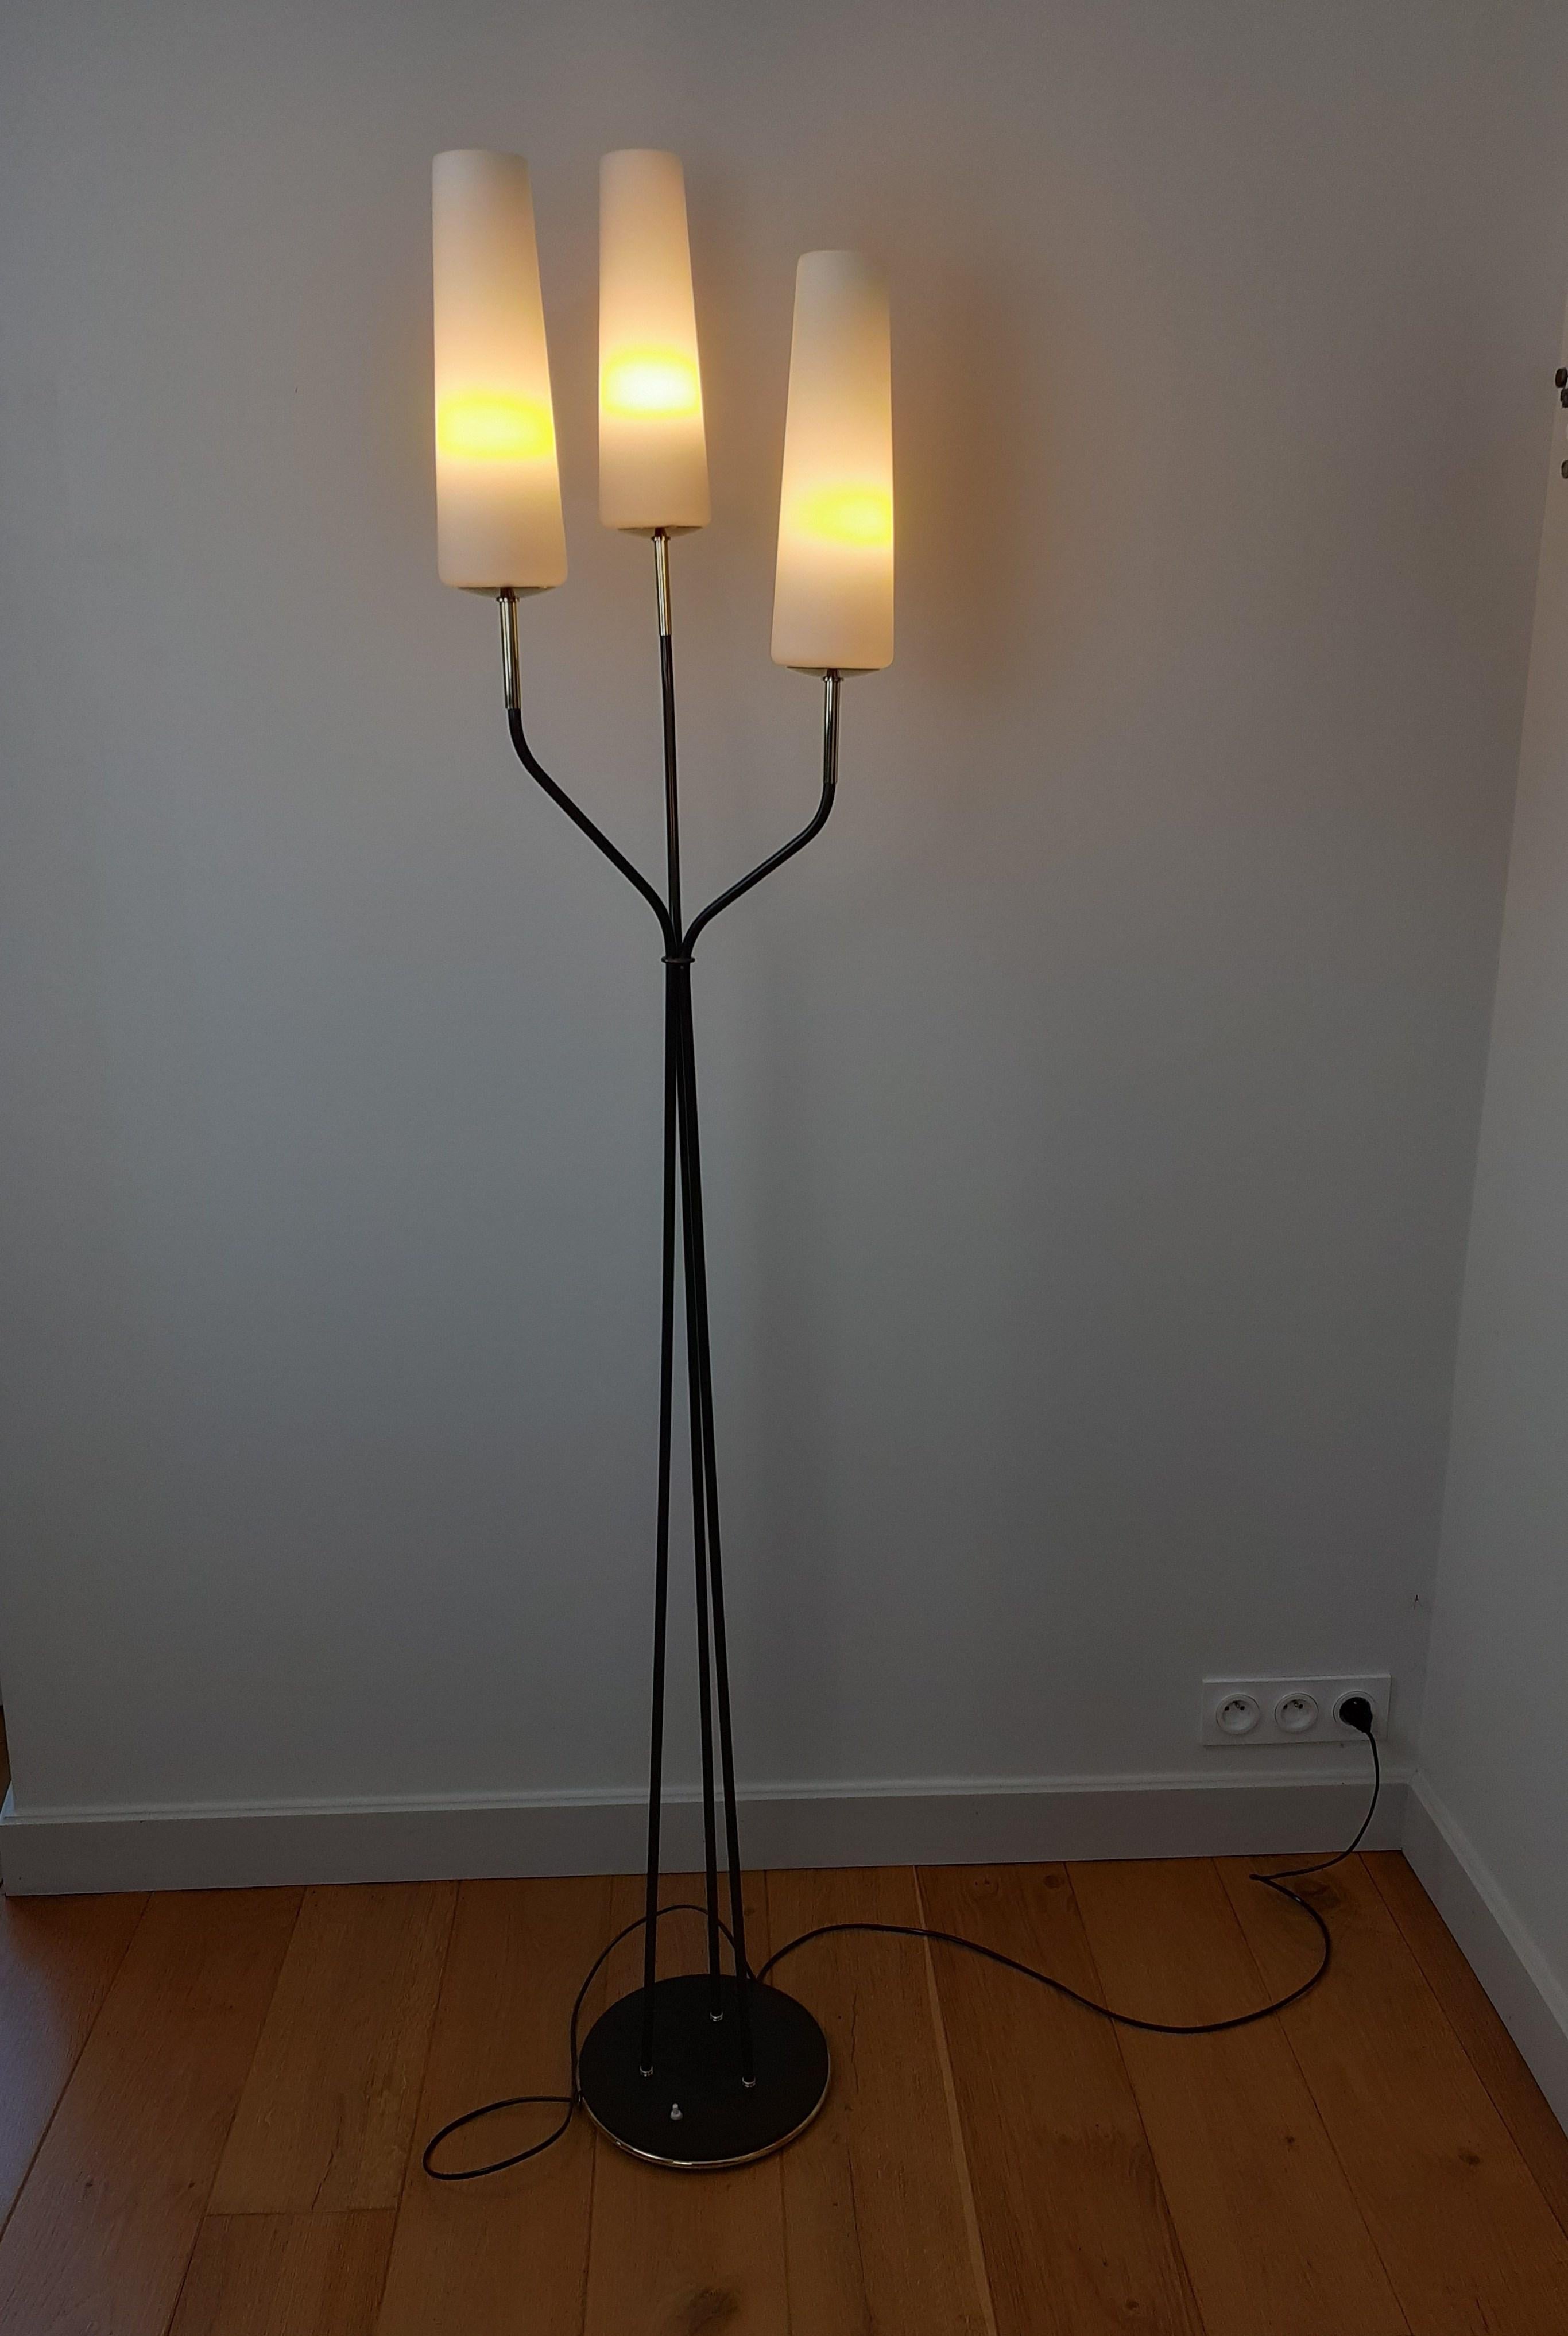 20th Century Floor Lamp with 3 Sconces, Lunel House, circa 1950